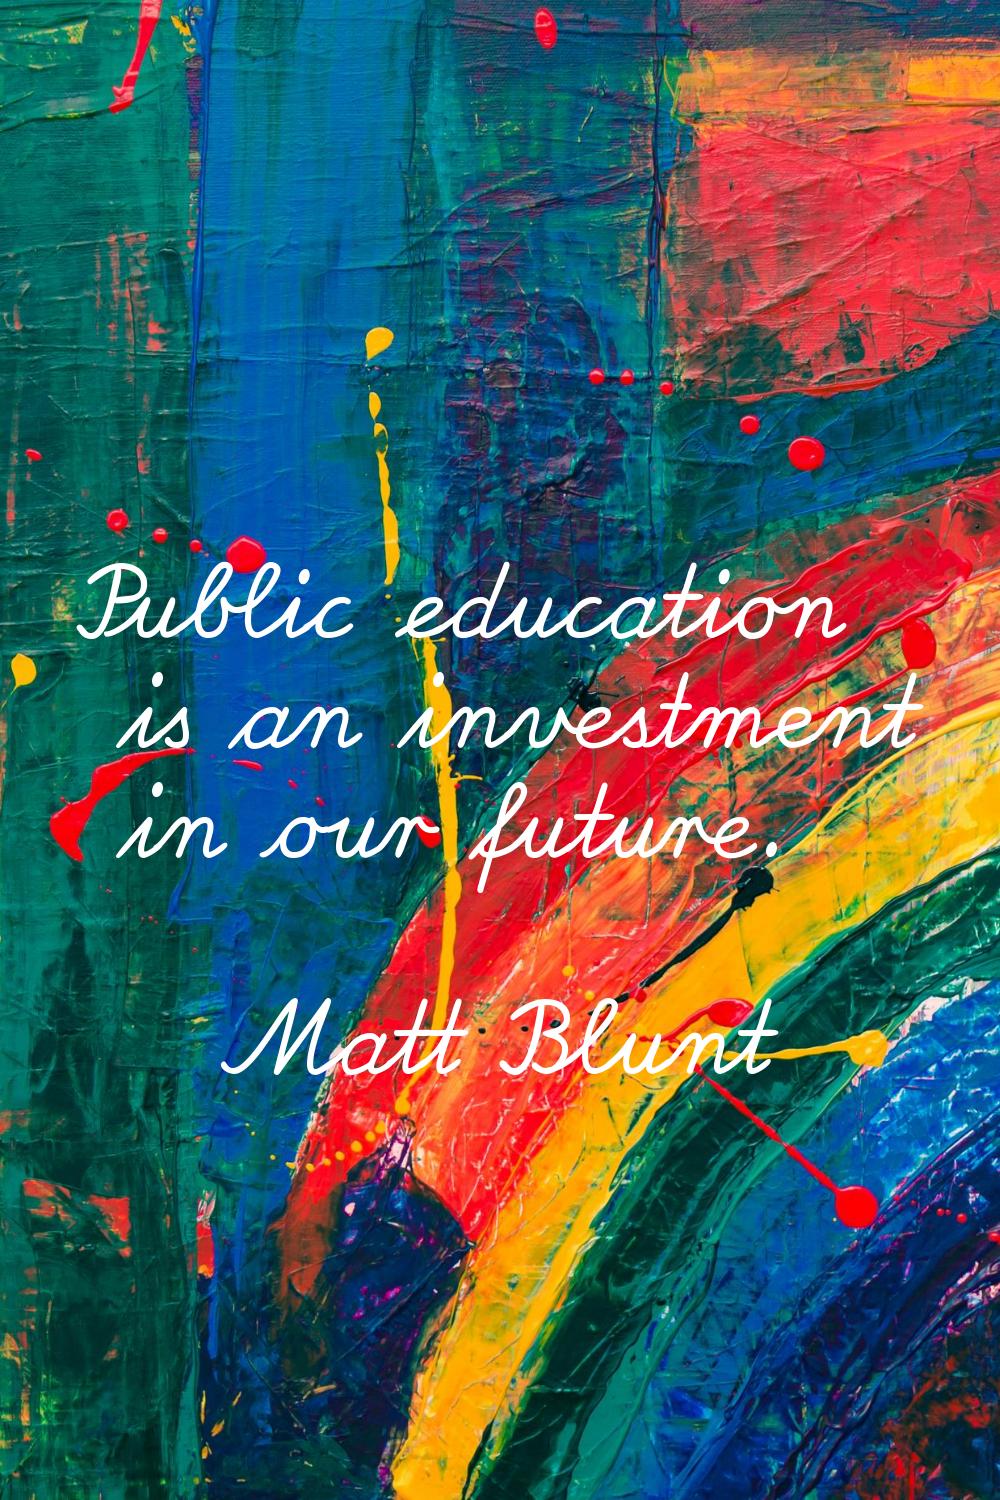 Public education is an investment in our future.